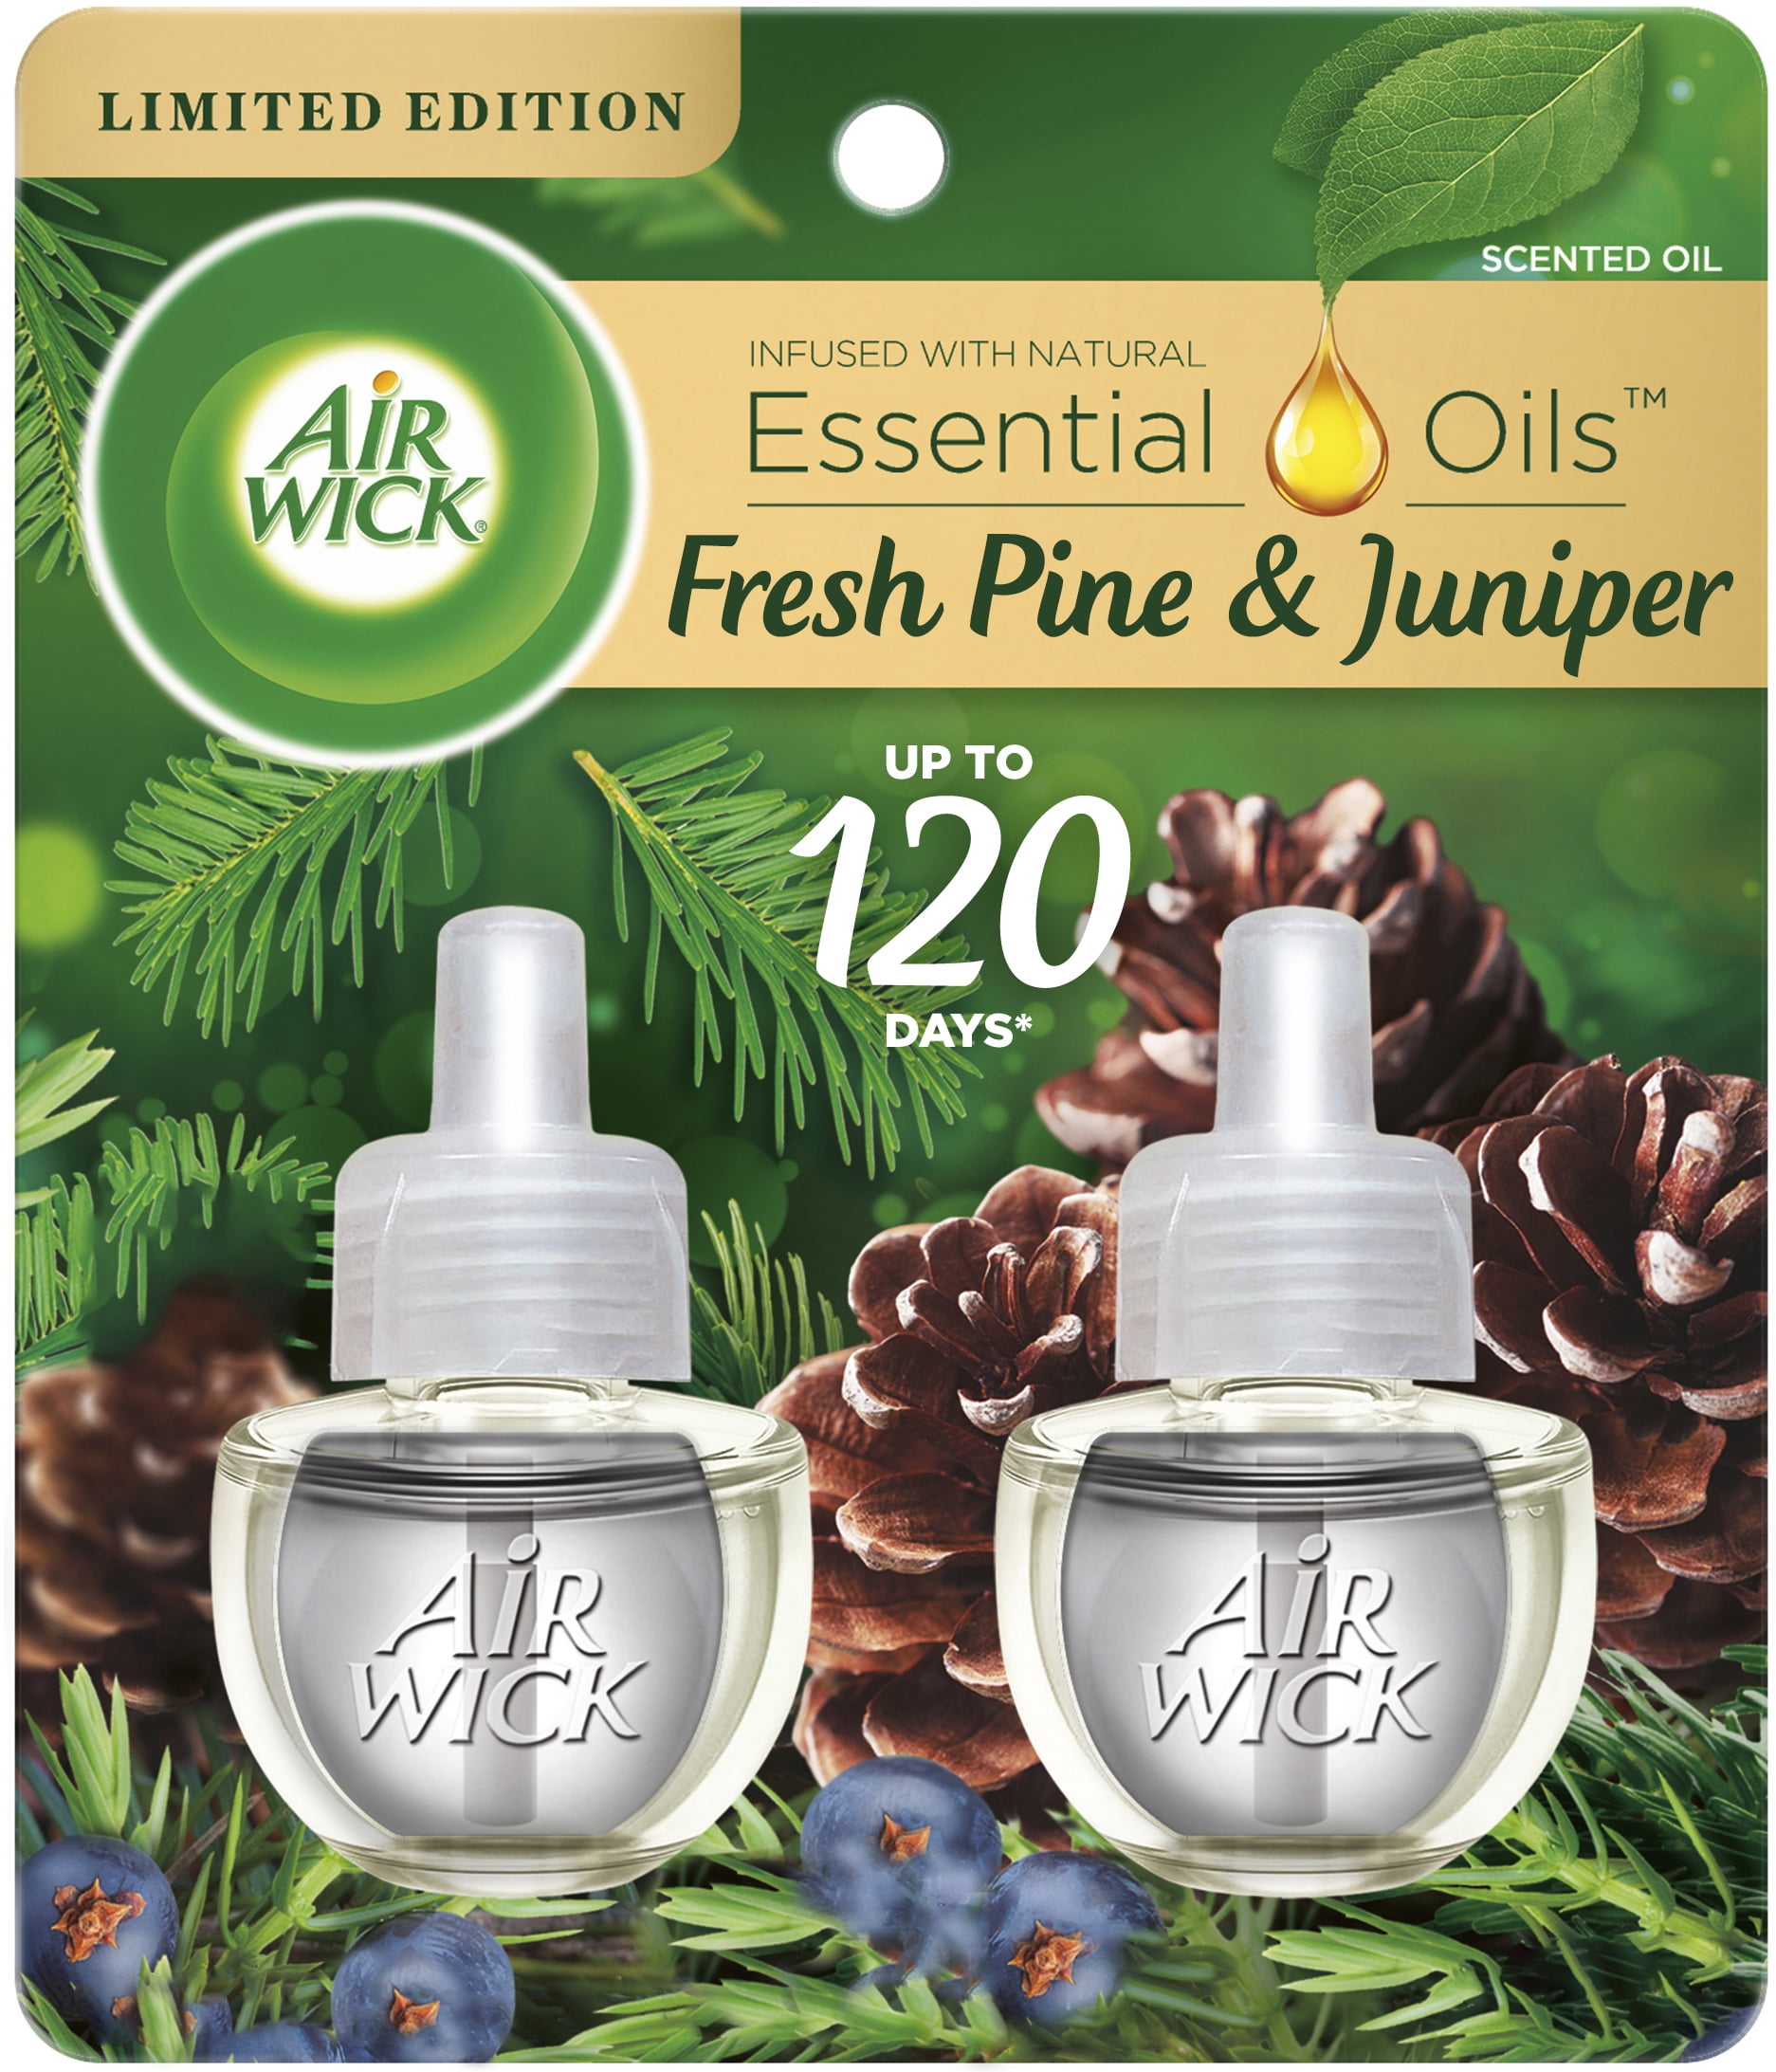 Air Wick Plug in Scented Oil Refill, 2 ct, Fresh Pine and Juniper, Air Freshener, Essential Oils, Fall Scent, Fall decor